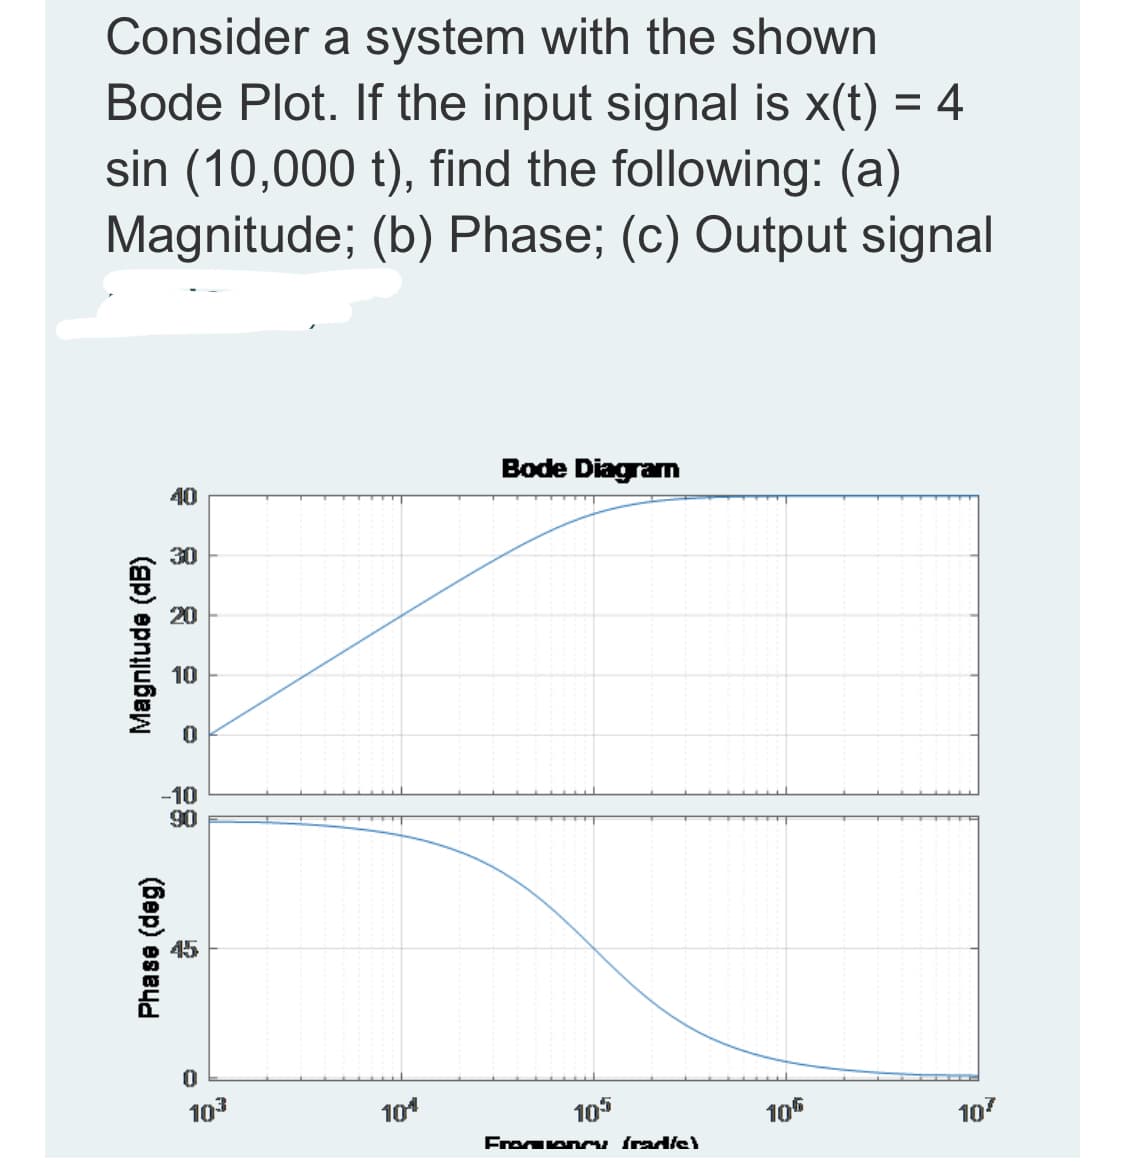 Consider a system with the shown
Bode Plot. If the input signal is x(t) = 4
sin (10,000 t), find the following: (a)
Magnitude; (b) Phase; (c) Output signal
Bode DiagraM
40
30
20
10
-10
90
45
103
10
105
105
107
Ereguen u frad/s)
Phase (deg)
Magnitude (dB)
